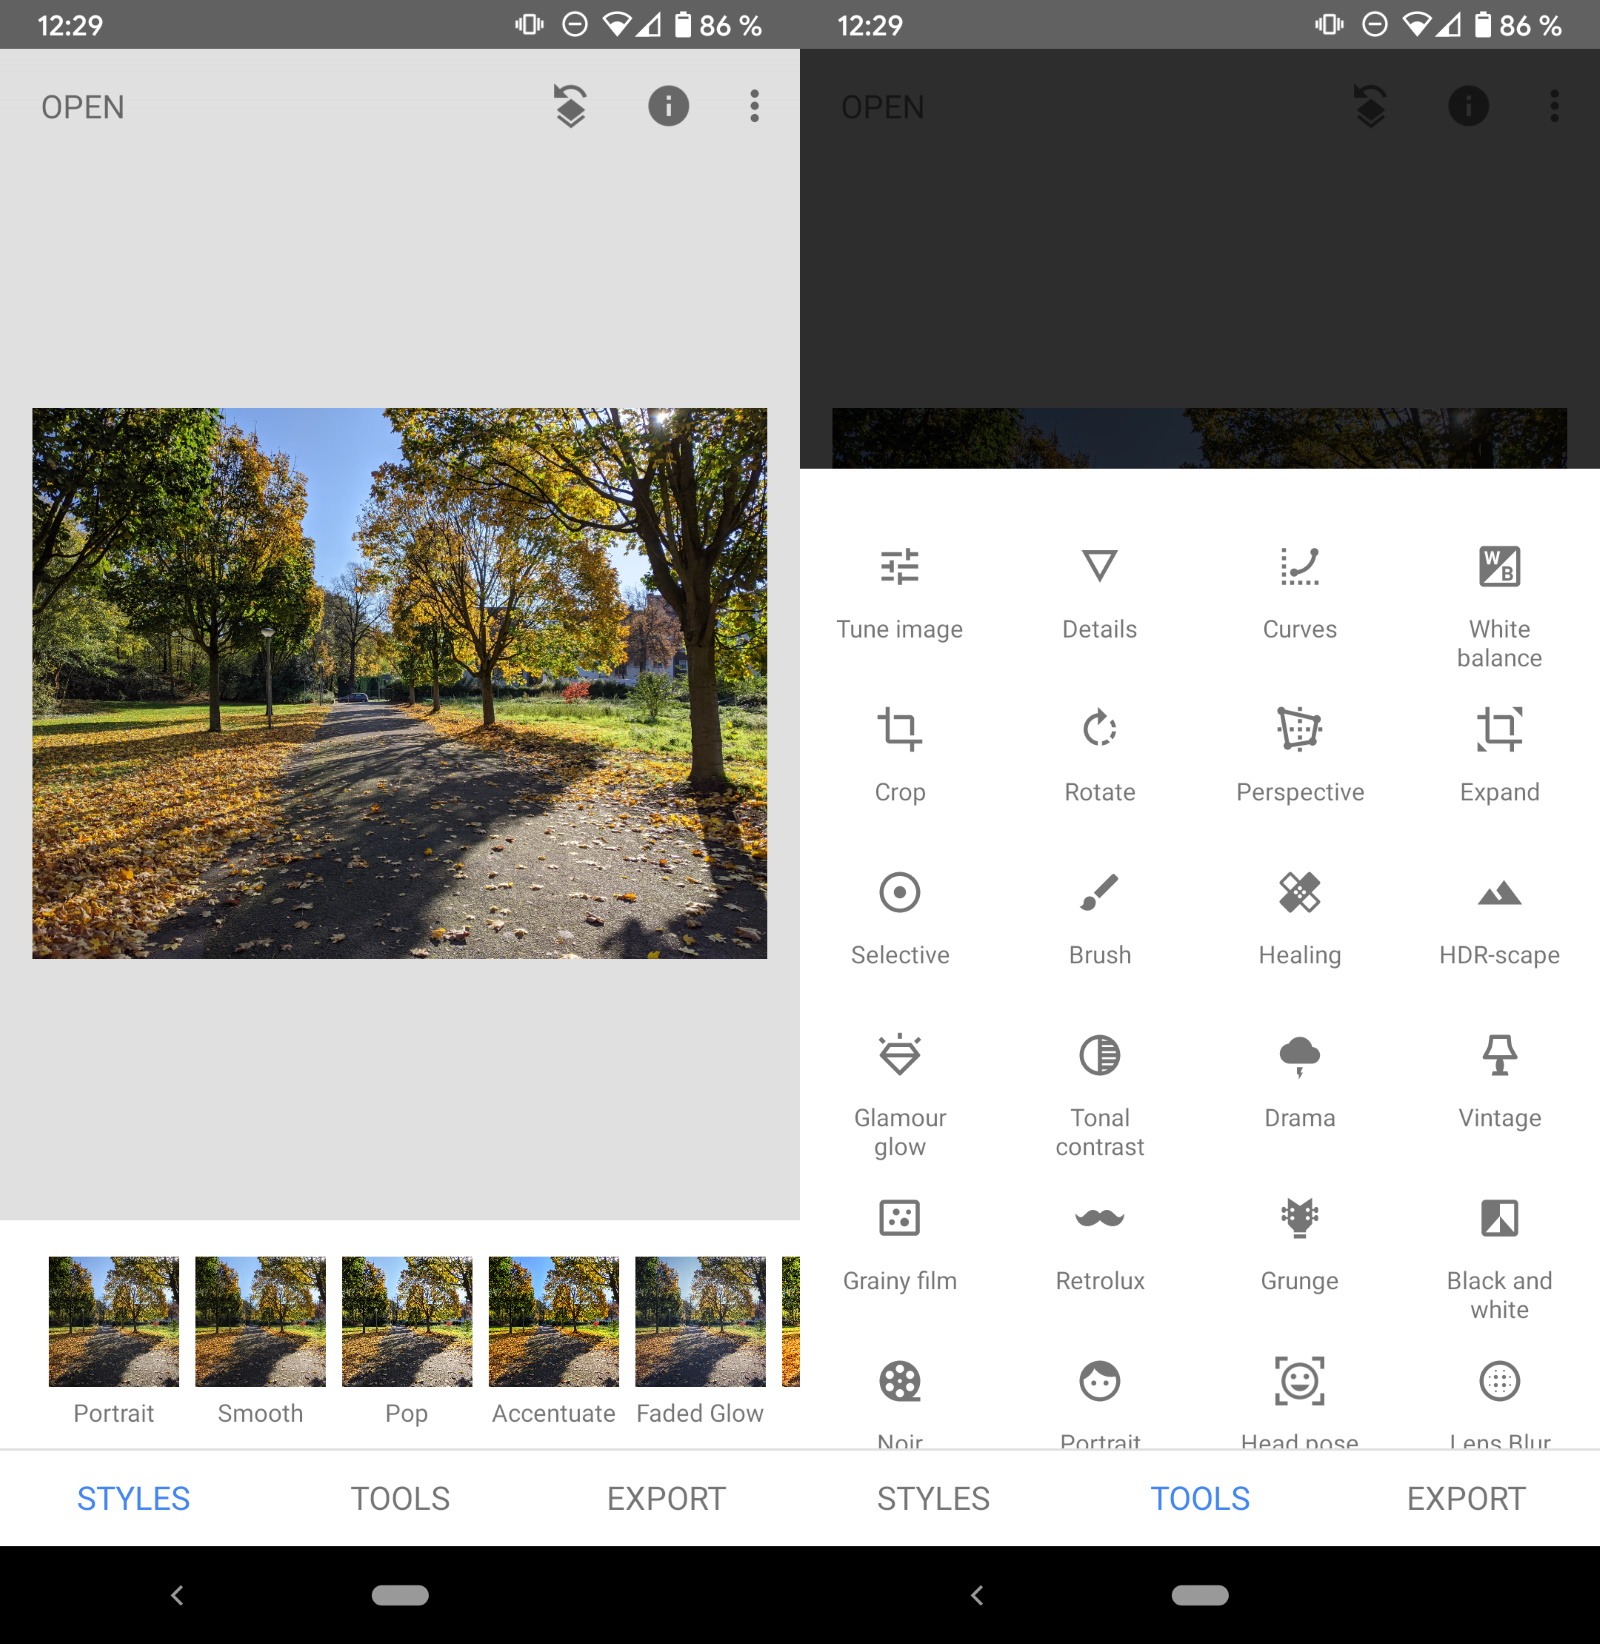 snapseed review - Snapseed Mod Apk V2.19.1 (Fully Unlocked)